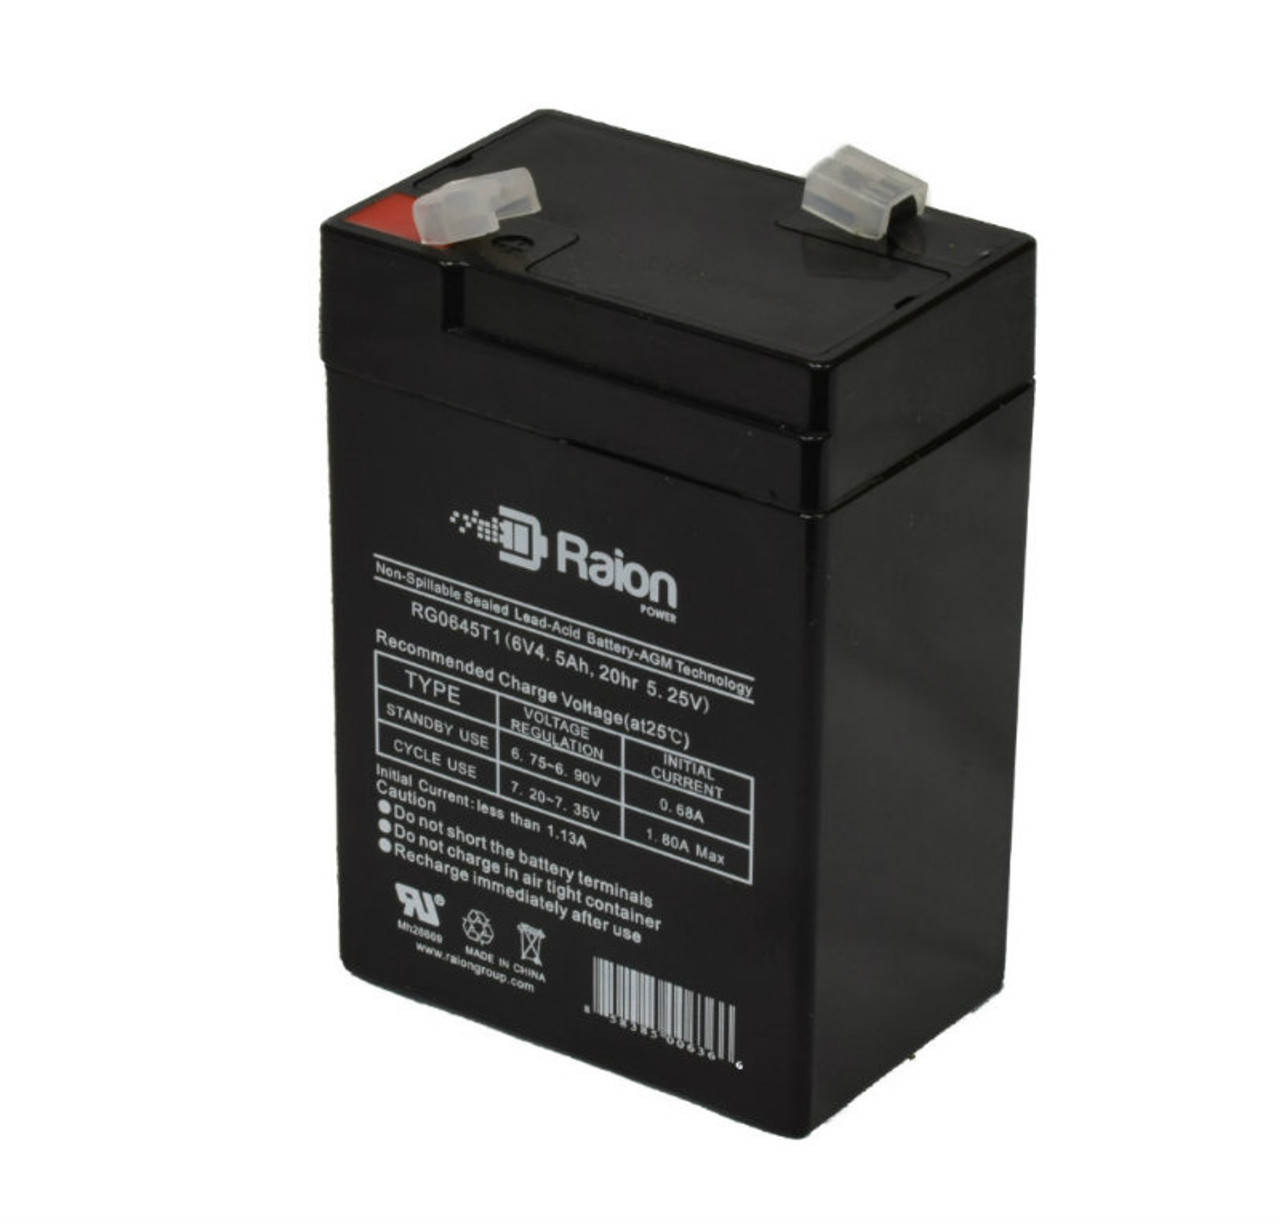 Raion Power RG0645T1 6V 4.5Ah Replacement Battery Cartridge for Welch Allyn CP200 ECG